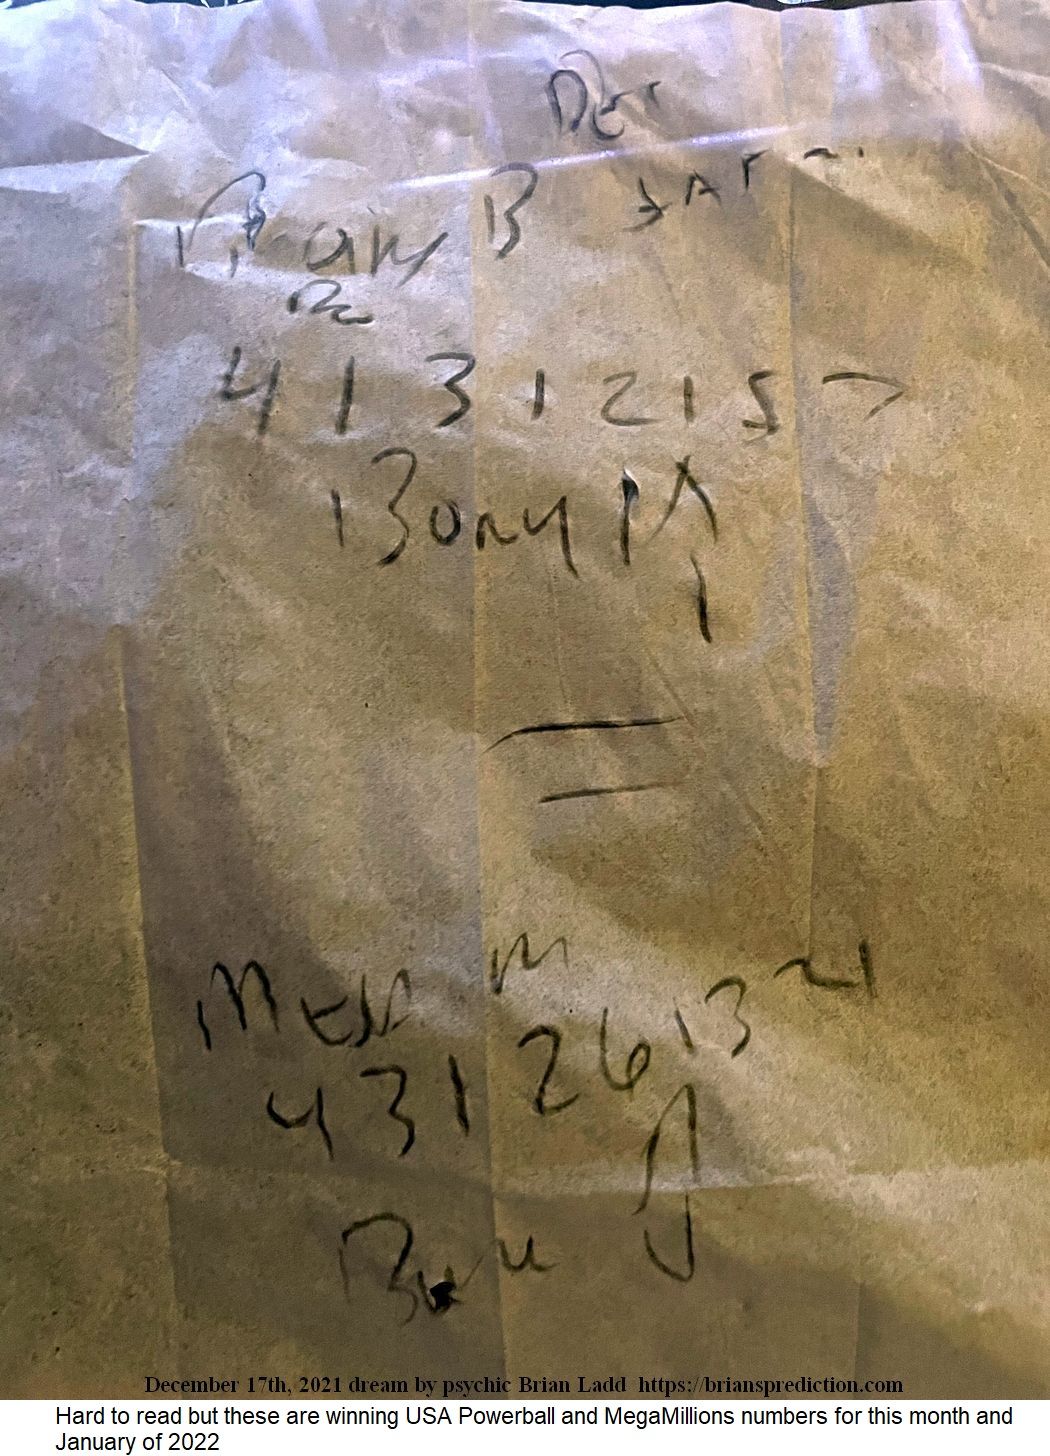 17 Dec 2021 1 Hard to read but these are winning USA Powerball and MegaMillions numbers for this month and January of 2022...
Hard to read but these are winning USA Powerball and MegaMillions numbers for this month and January of 2022.
